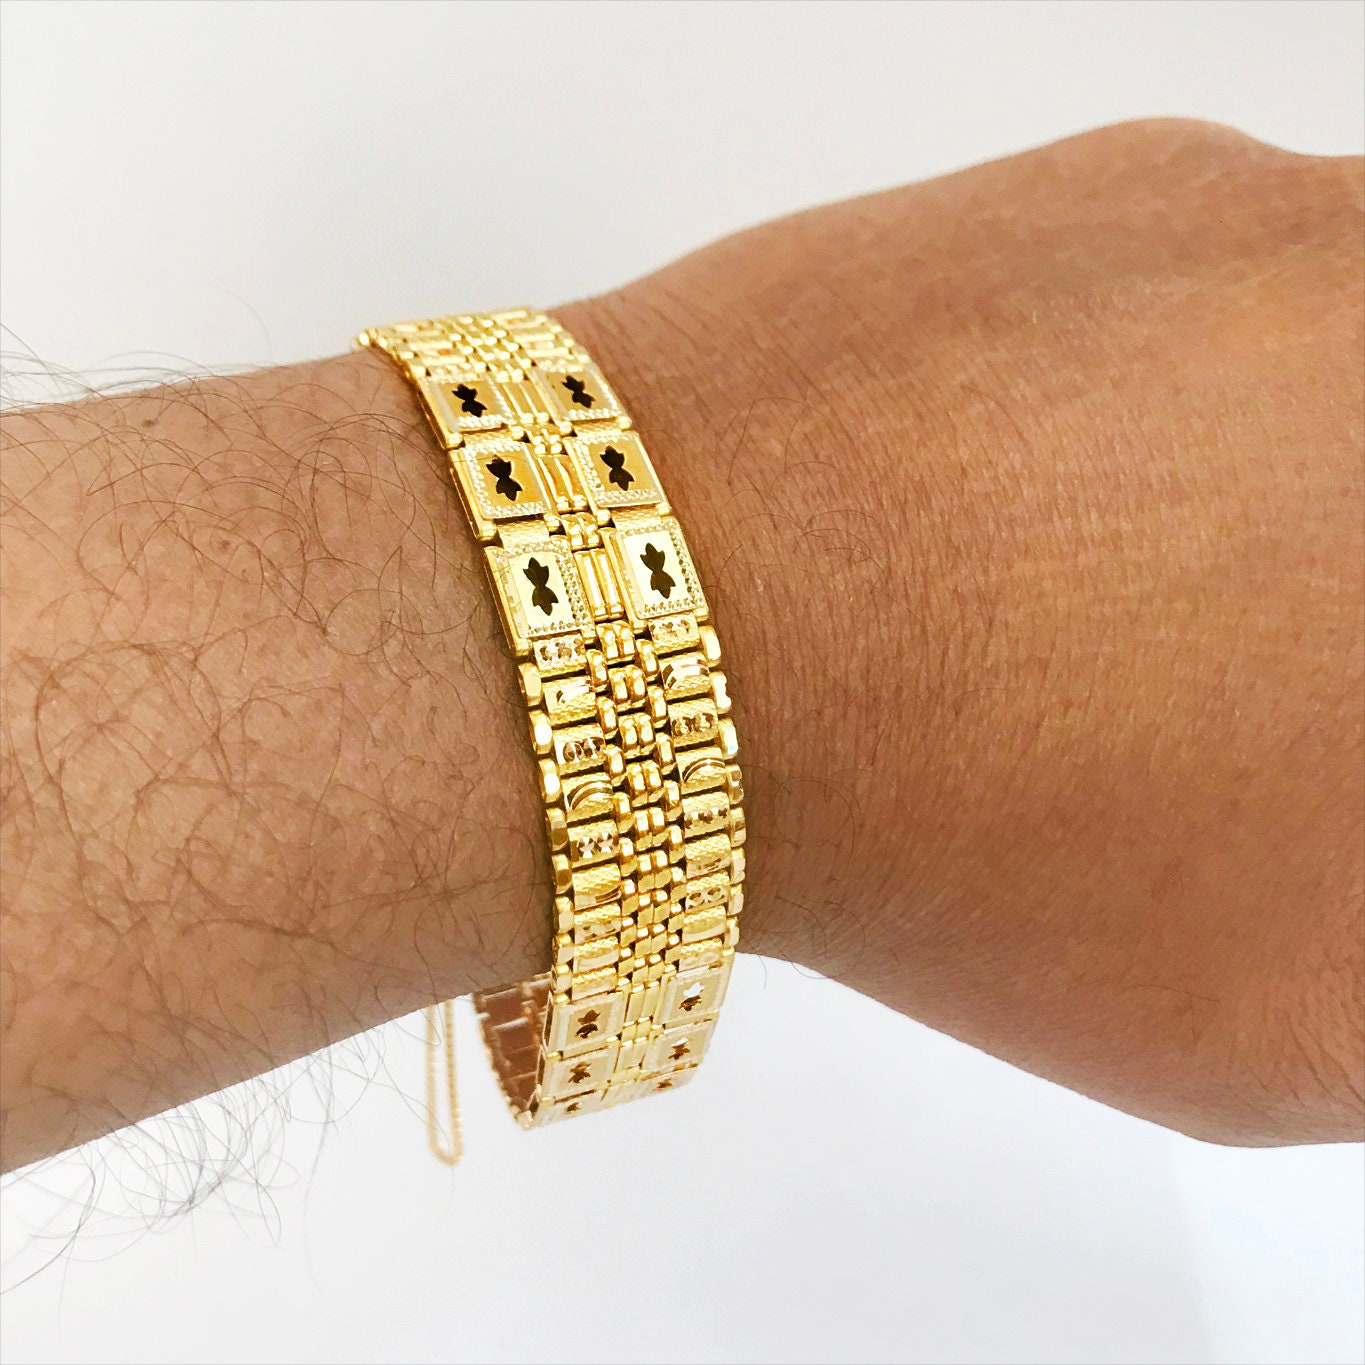 22ct Gold Bangles with intricate filigree cut design